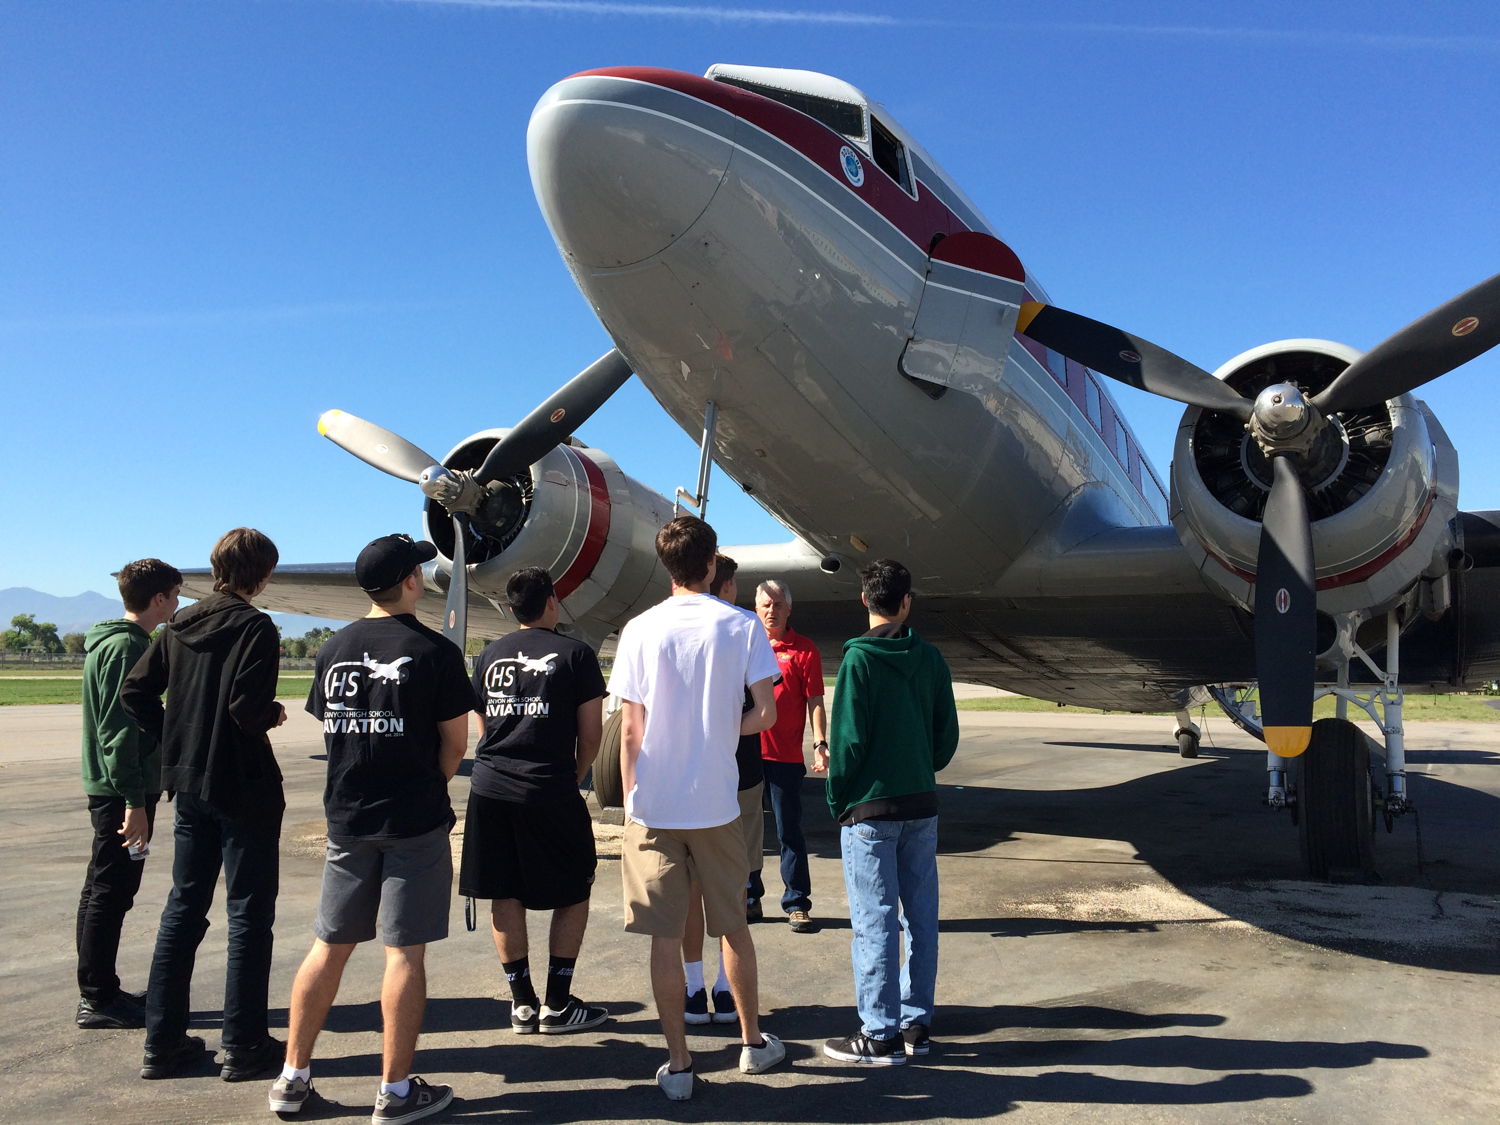 Aviation II students at Canyon High School toured Flabob airport and sat inside this DC-3 while learning the history of the airplane. Then they took turns sitting in the cockpit.